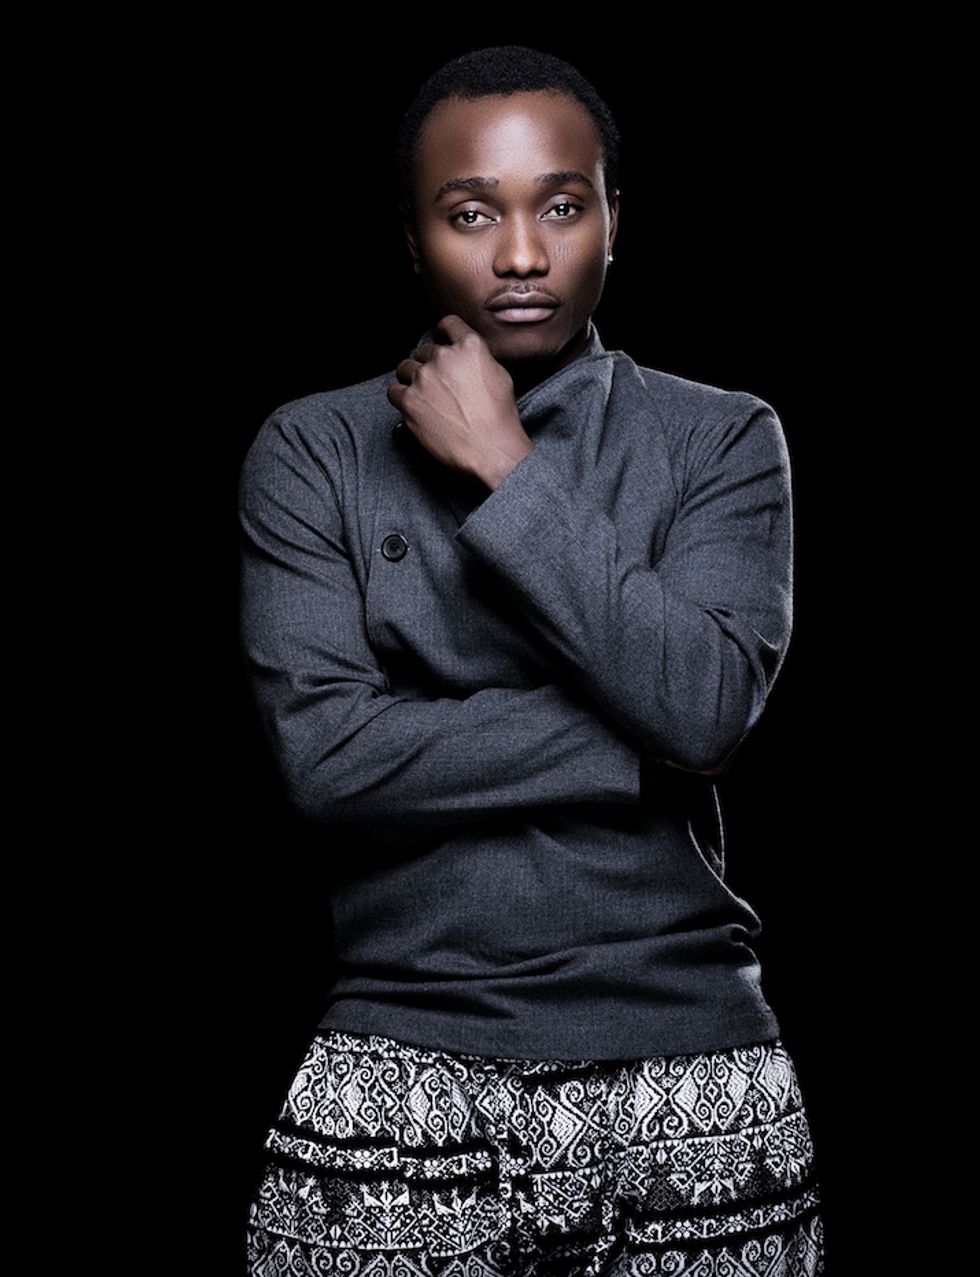 A Nigerian Star Finds His Voice: A Skype Call With Brymo